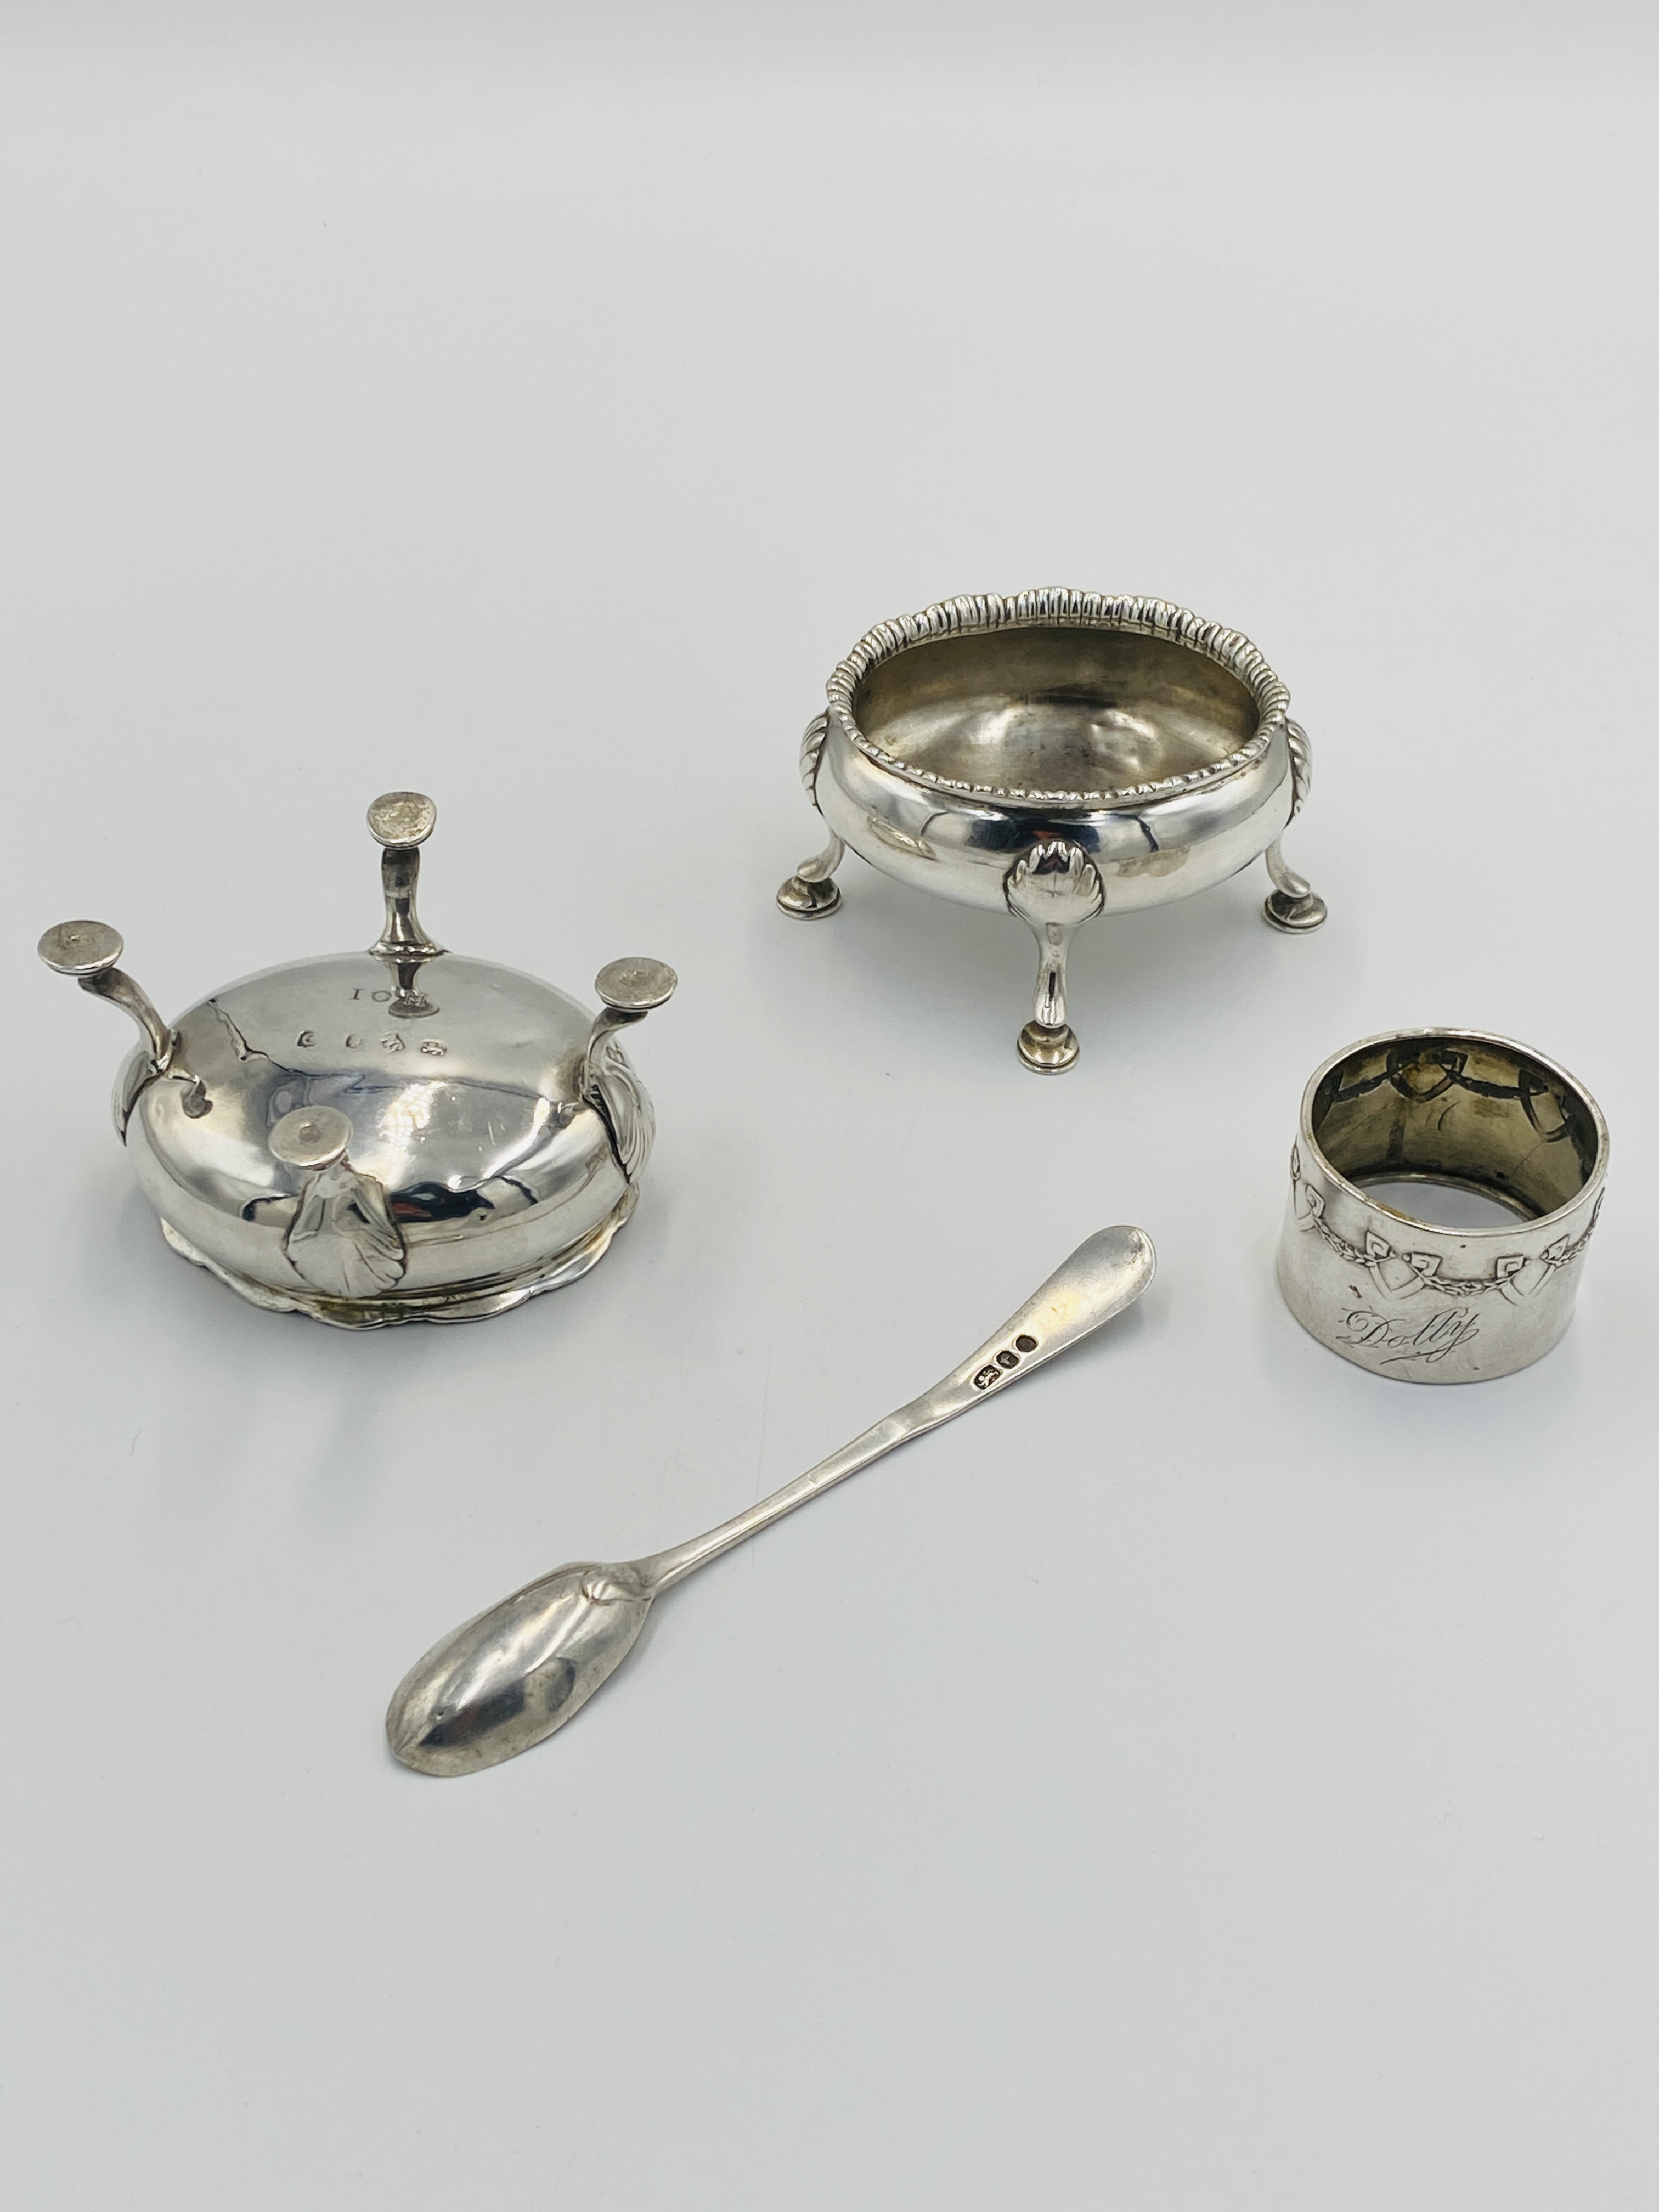 Two silver salts and a silver napkin ring - Image 5 of 6